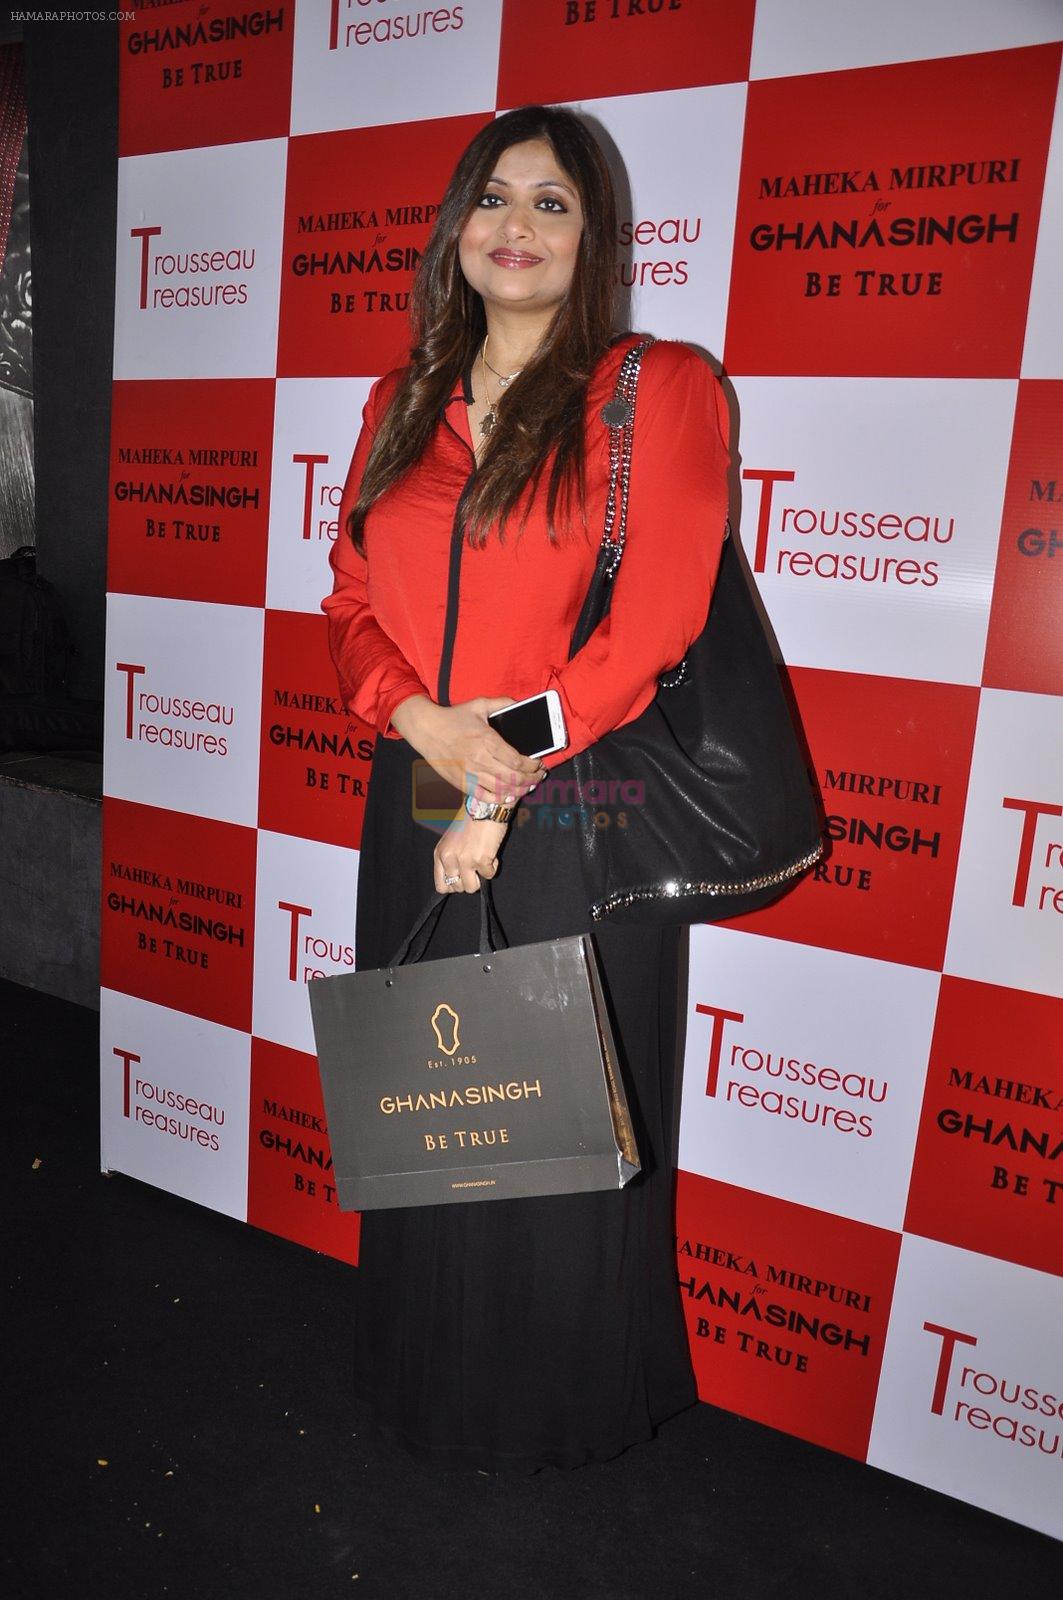 at the launch of collection Trousseau Treasures designed by Maheka Mirpuri at the Ghanasingh Be True Jewellery Salon, Bandra on 11th Feb 2015